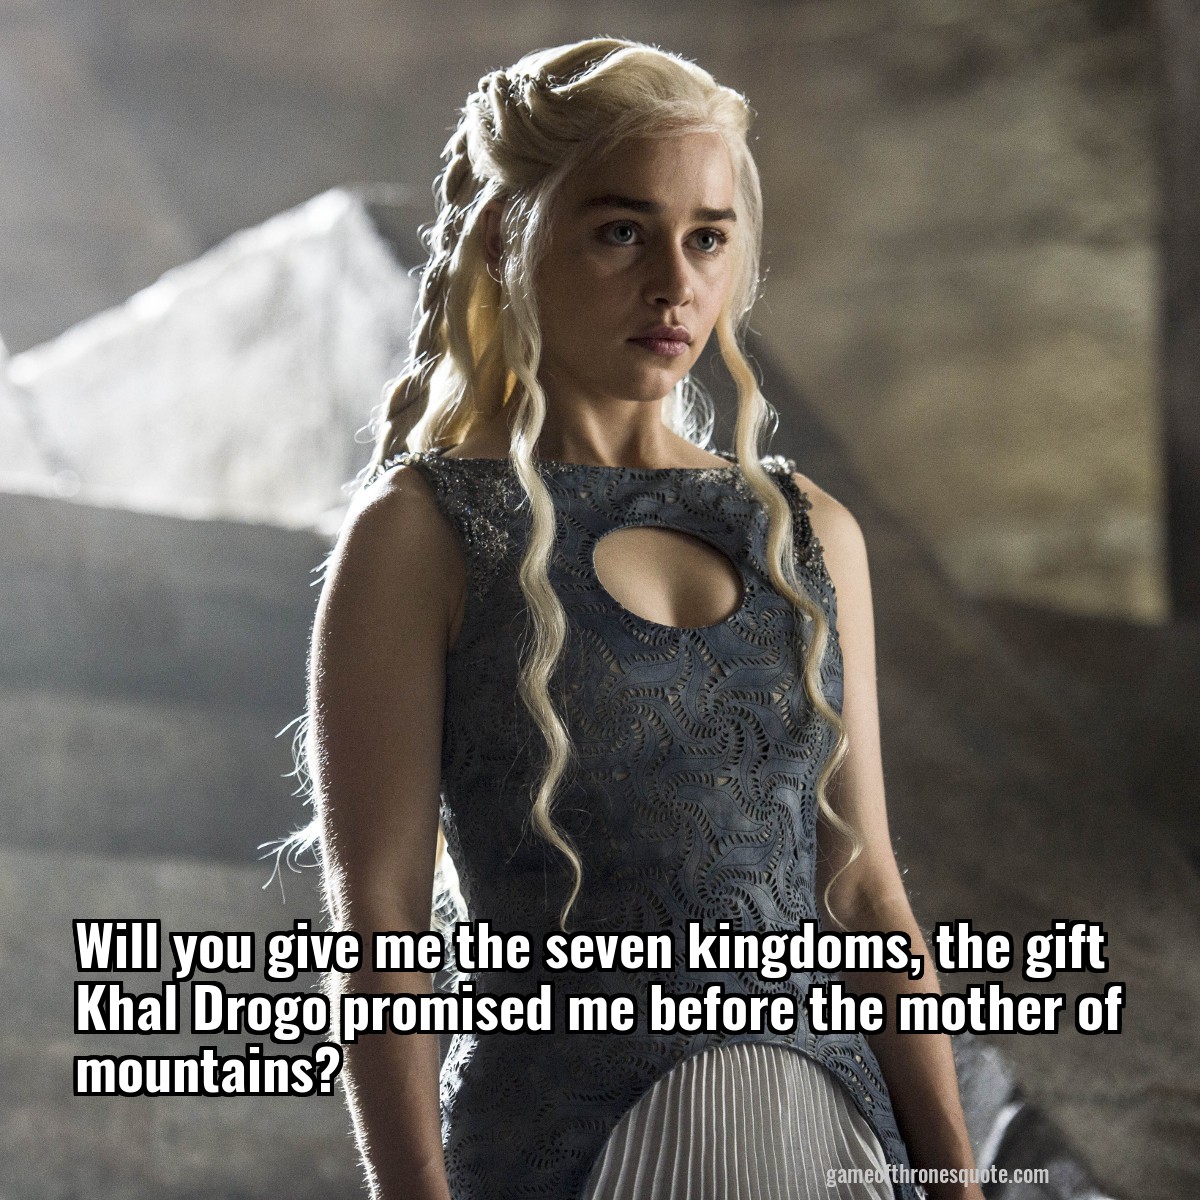 Will you give me the seven kingdoms, the gift Khal Drogo promised me before the mother of mountains?